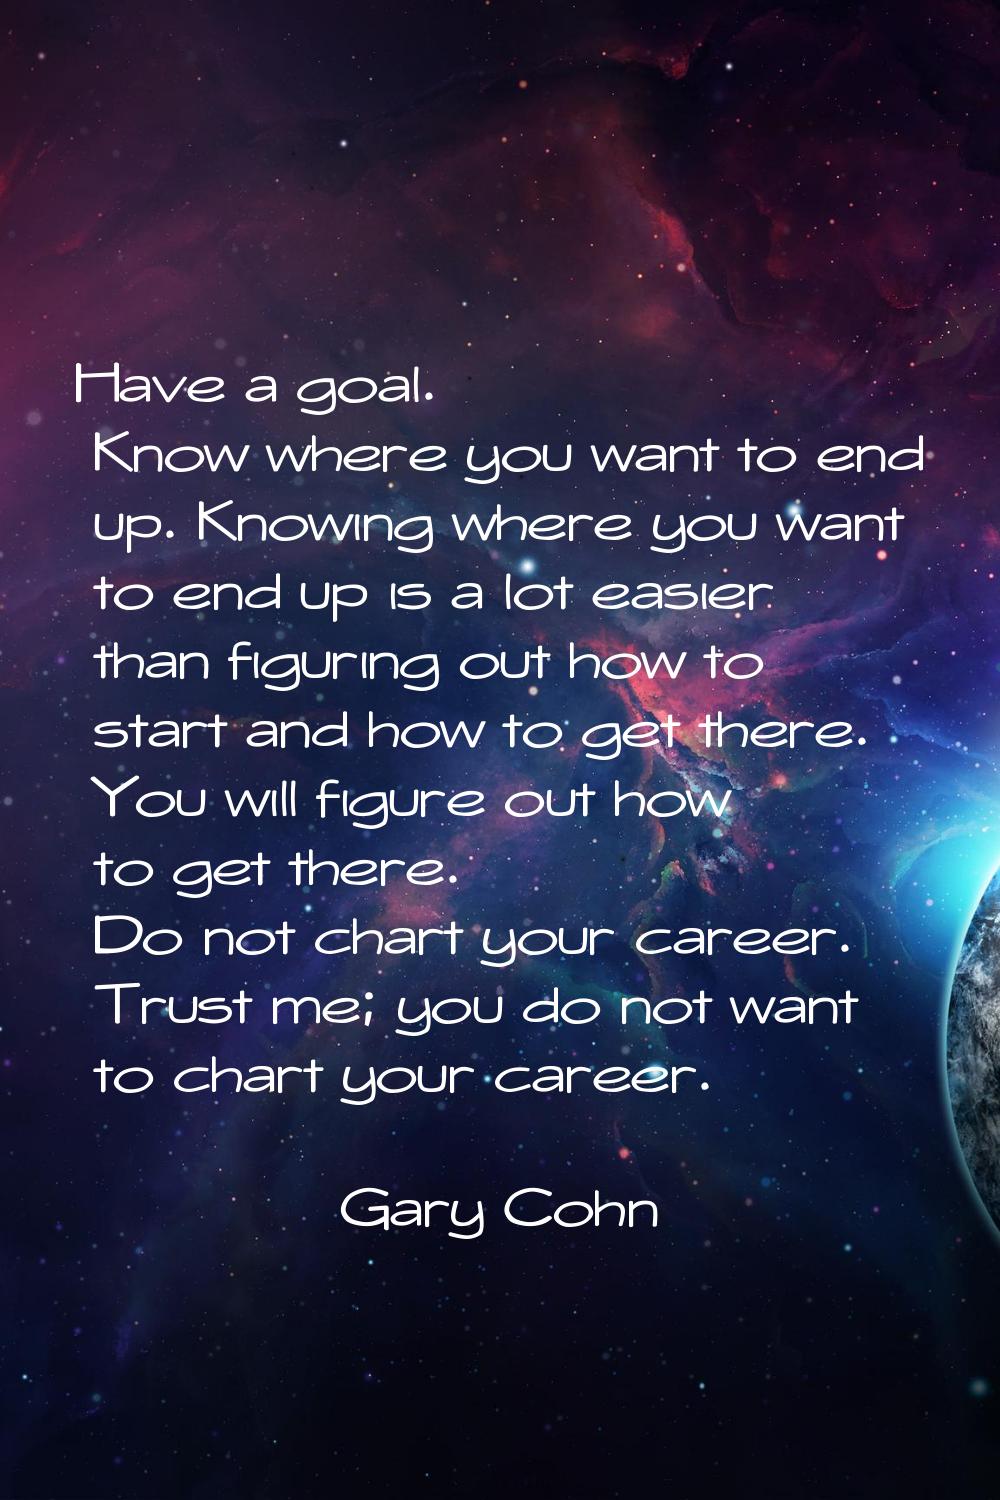 Have a goal. Know where you want to end up. Knowing where you want to end up is a lot easier than f